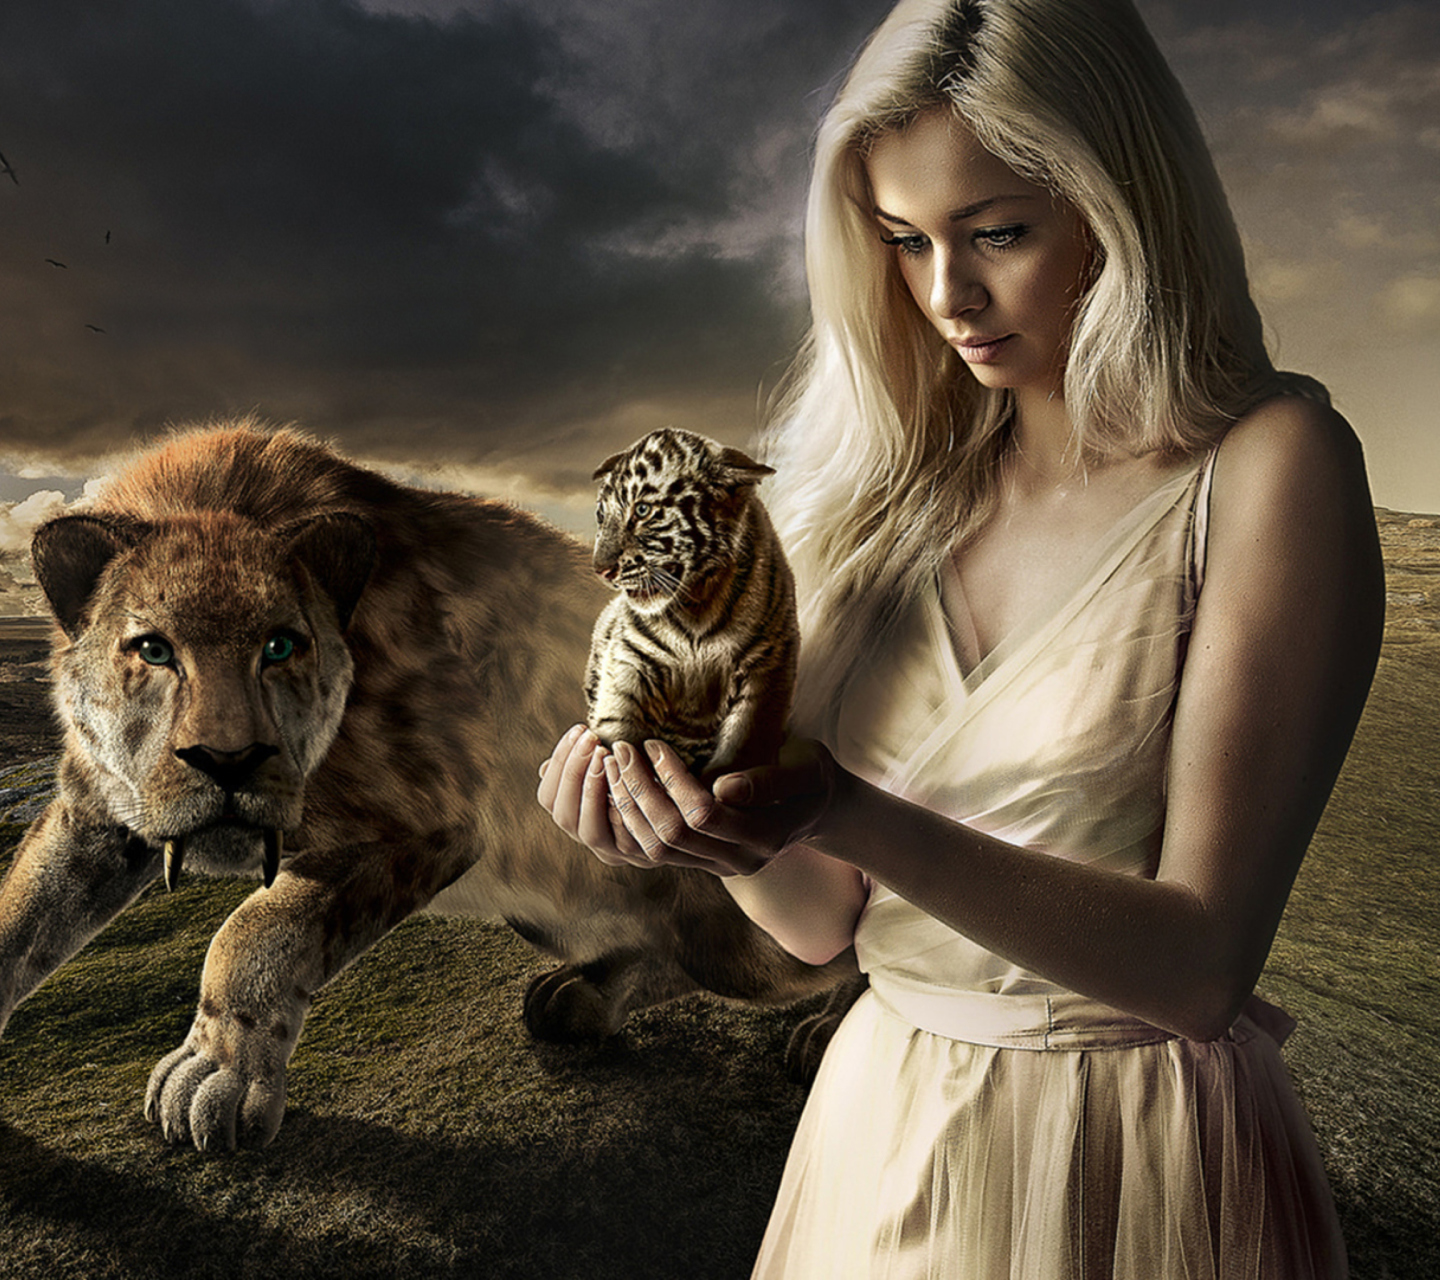 Girl With Tiger wallpaper 1440x1280